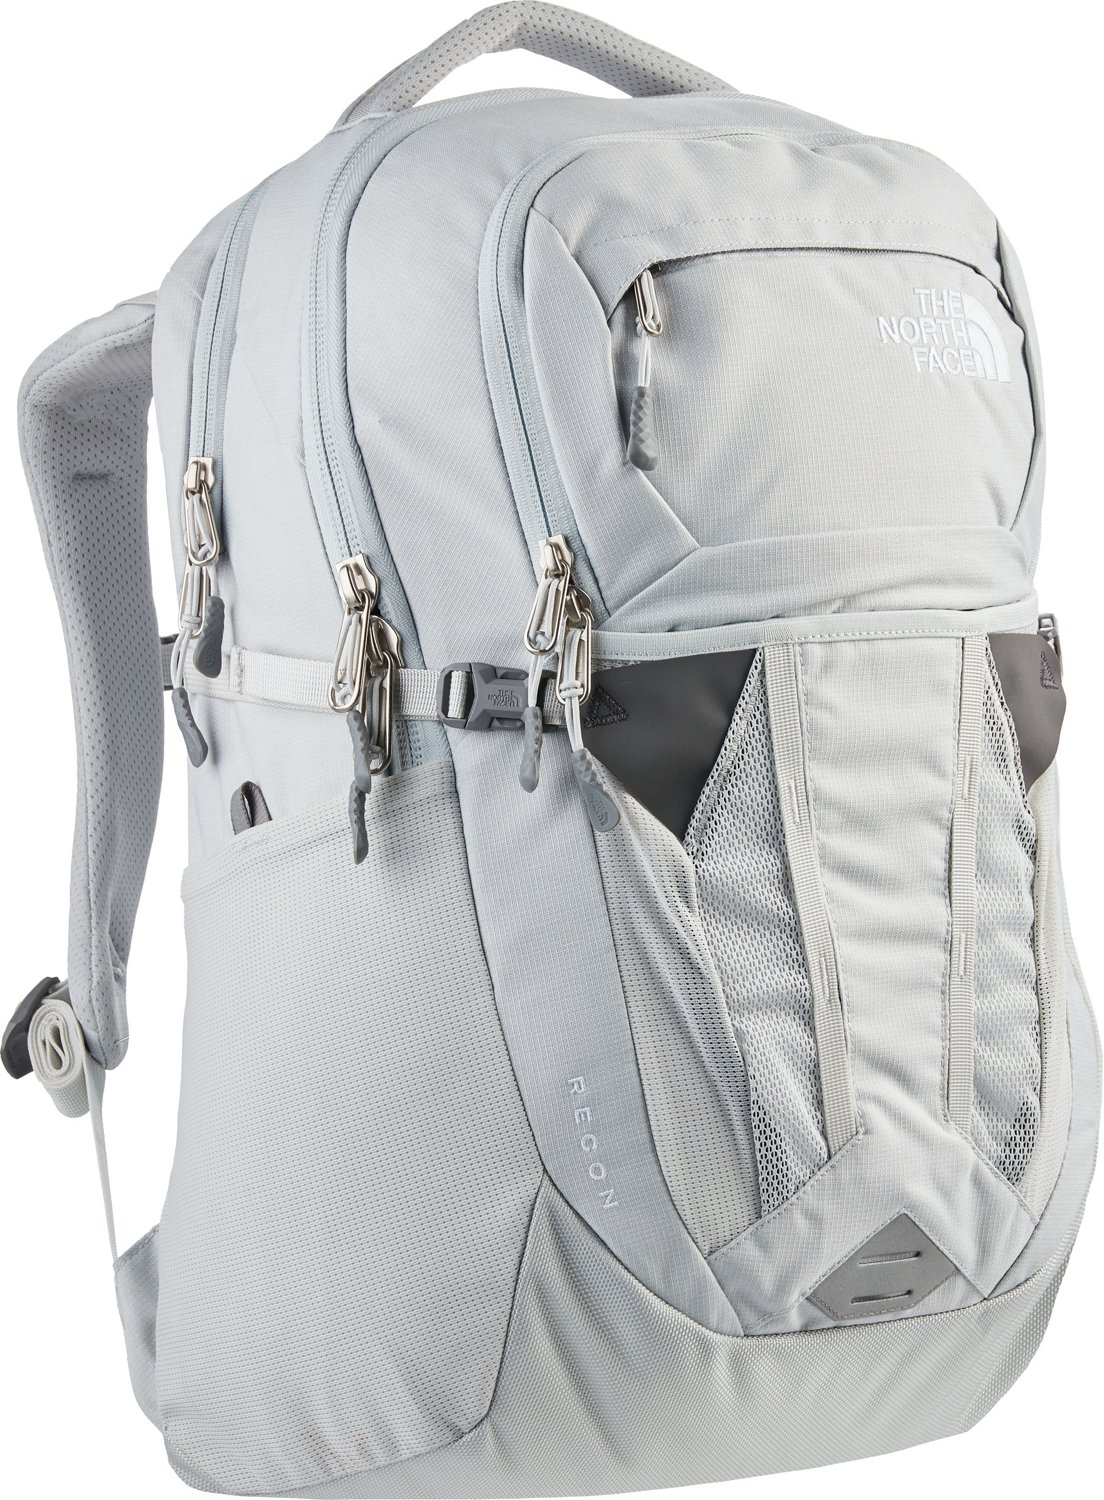 academy sports north face backpack